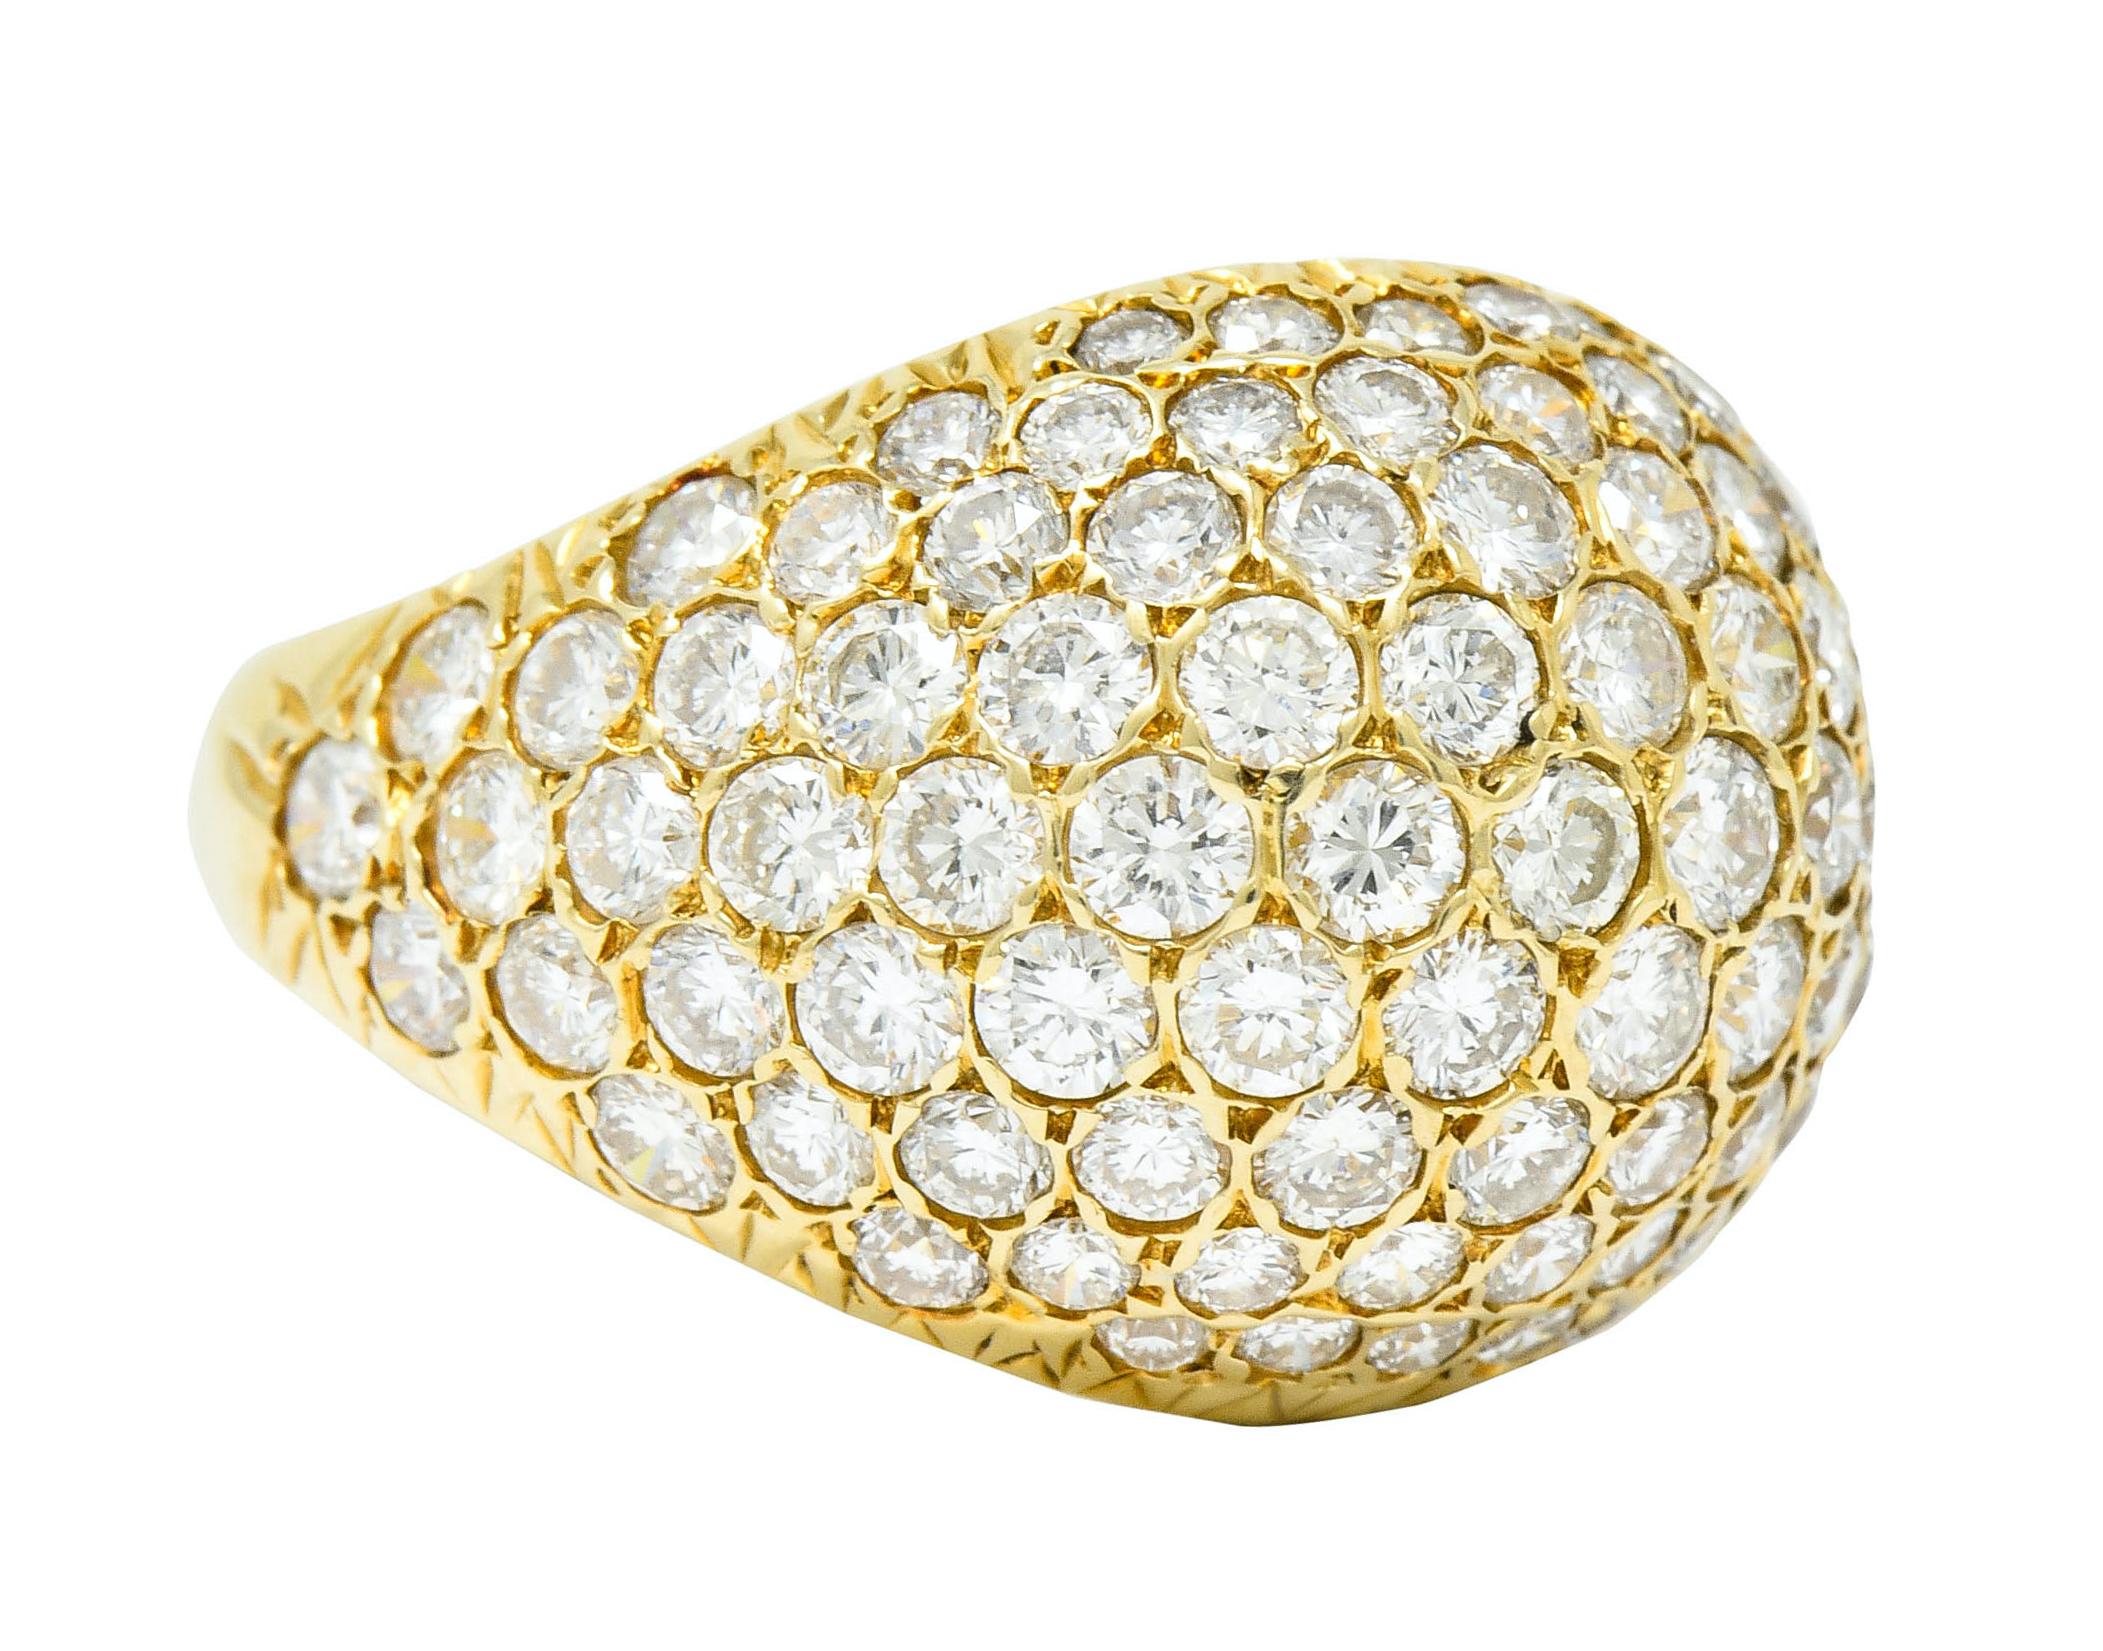 Bombay style band with a domed top and brightly polished gold

Pavè set throughout by round brilliant cut diamonds weighing approximately 3.75 carats total, G/H color with VVS clarity

With maker's mark and numbered

Stamped 14K for 14 karat